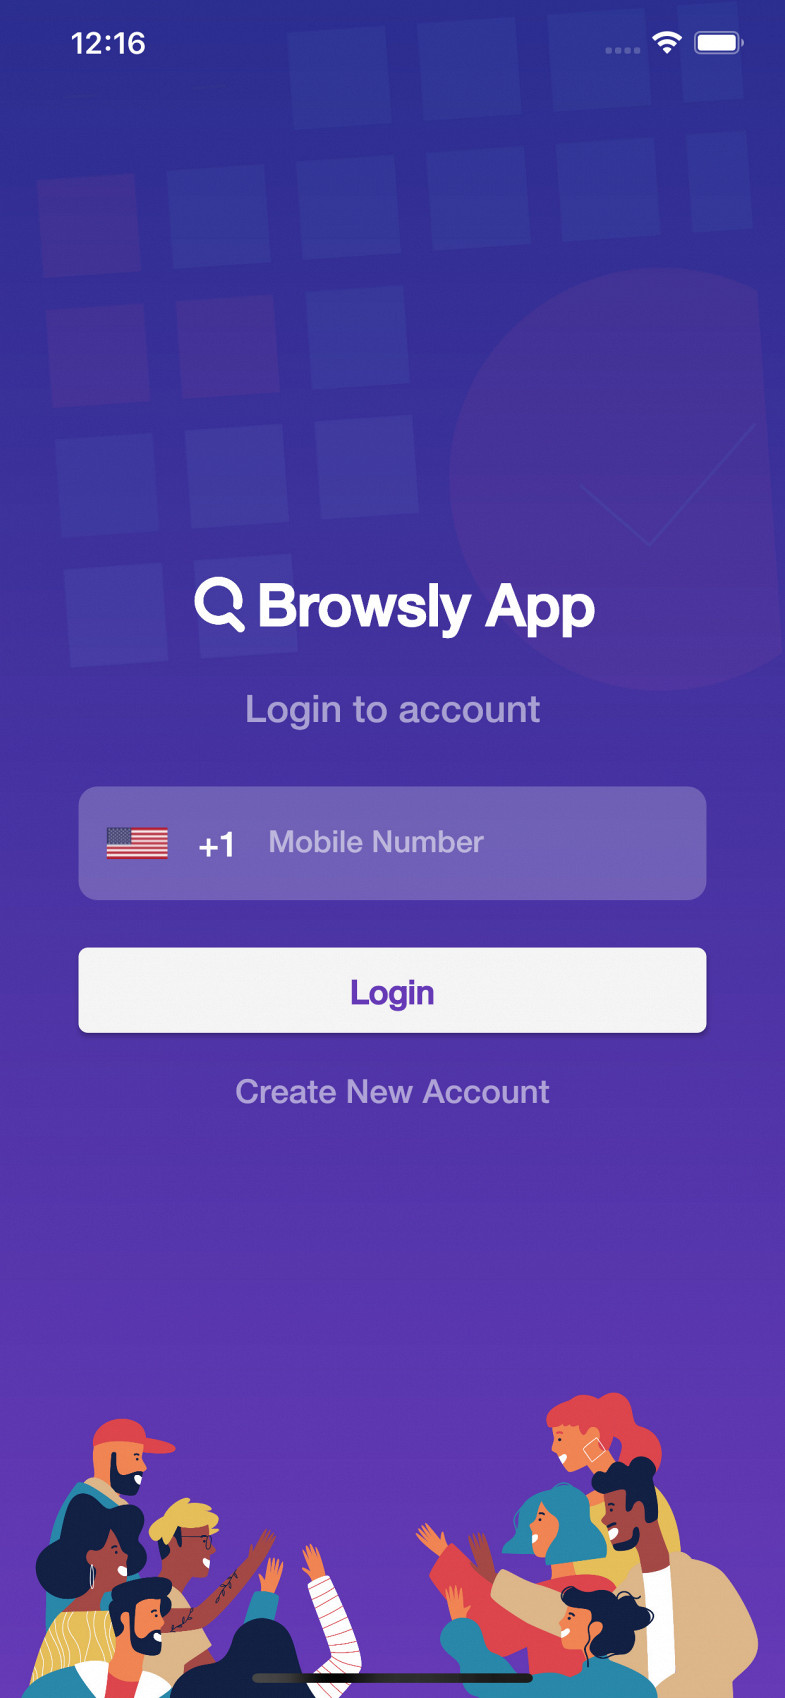 Browsly App  Featured Image for Version 